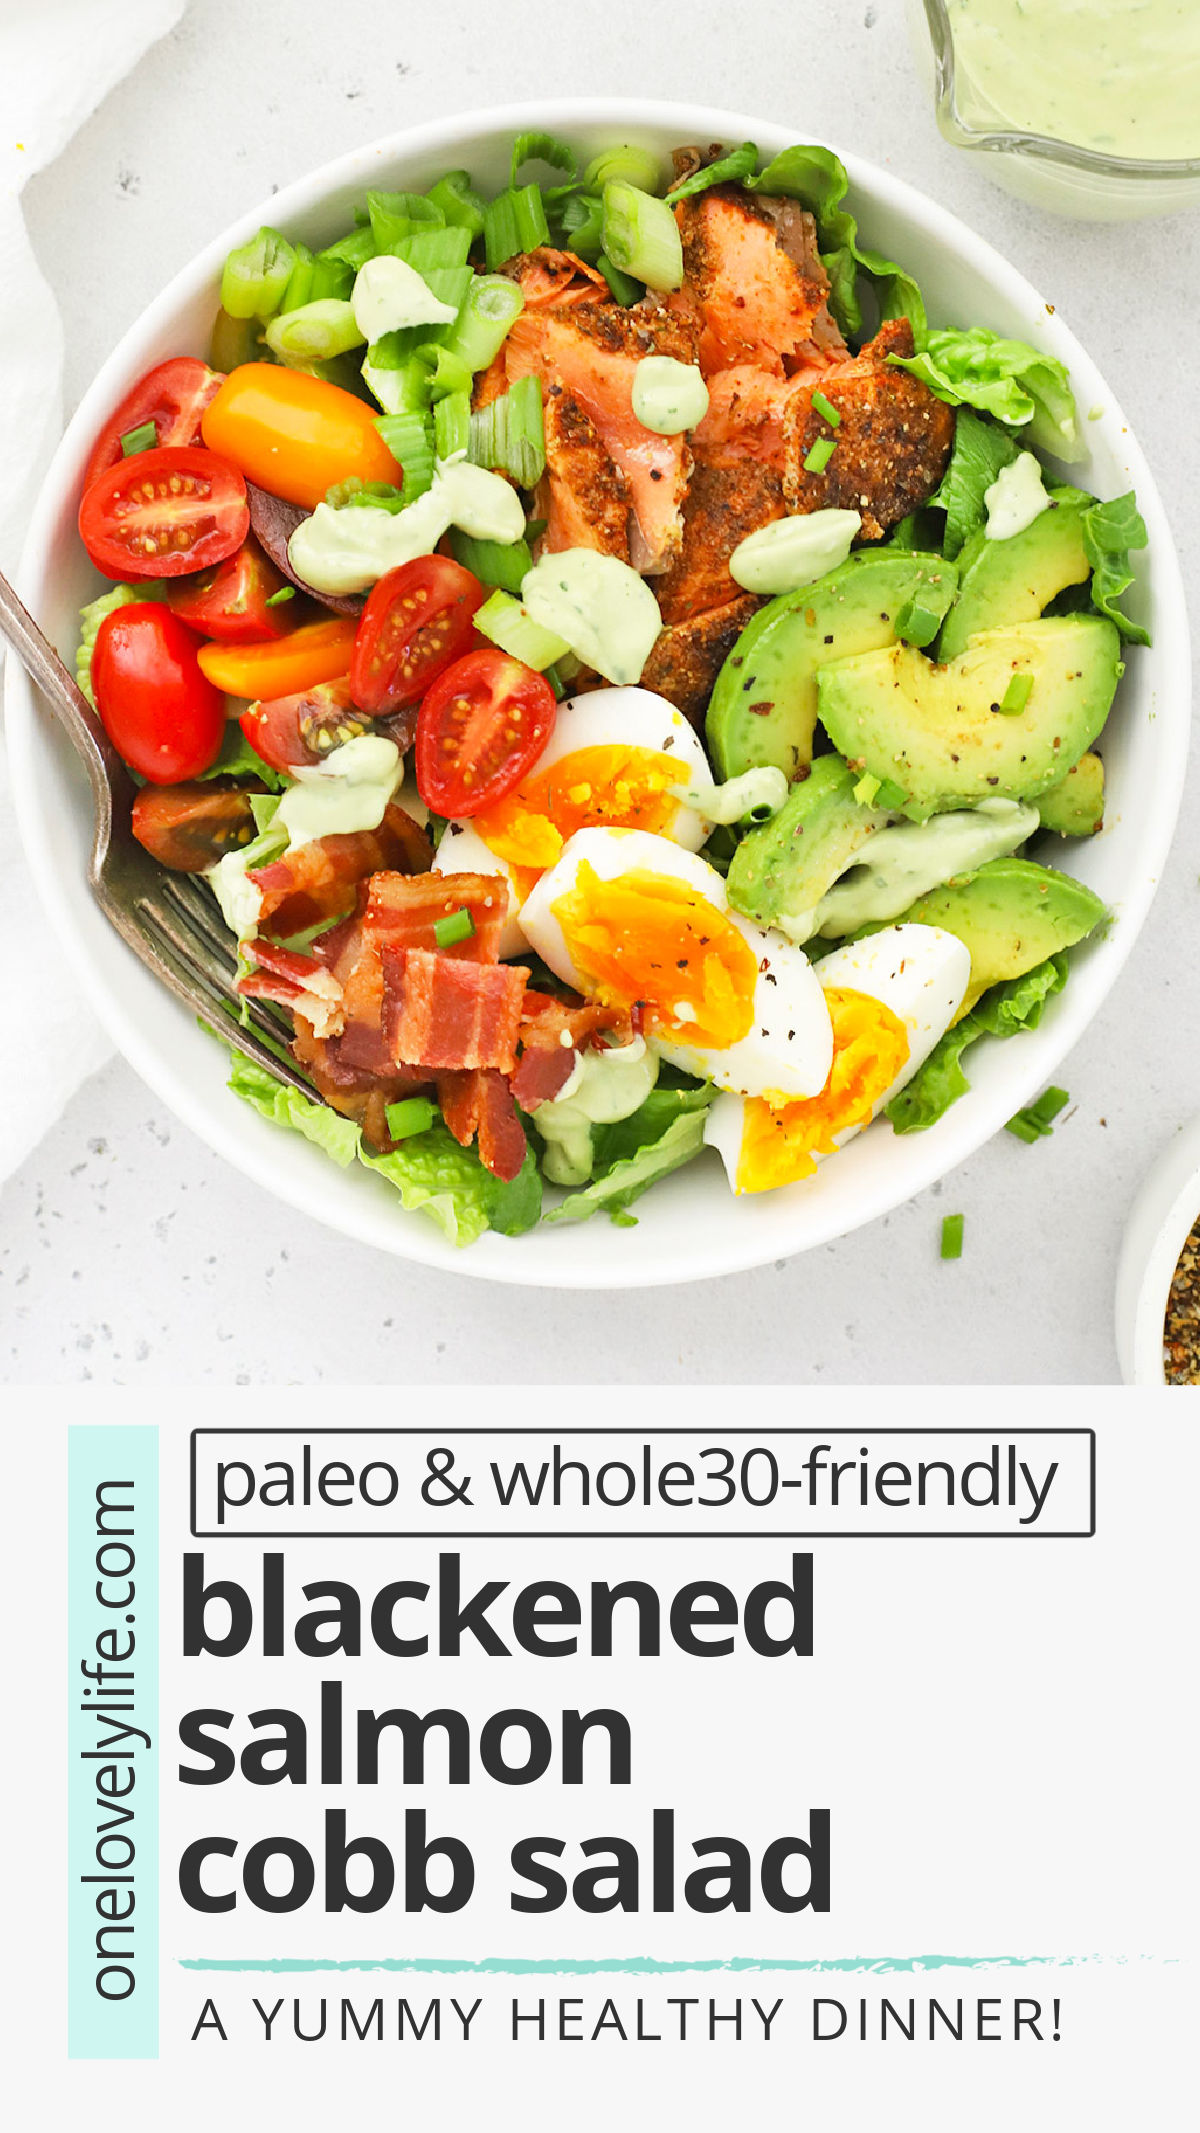 Blackened Salmon Cobb Salad - This salmon Cobb salad full of colorful veggies and finished with a creamy avocado green goddess dressing we can't get enough of! (Paleo, Whole30-Friendly) // Salmon Salad // Blackened Salmon Recipe // Salmon Cobb Recipe // Healthy Dinner #paleo #whole30 #cobbsalad #greengoddess